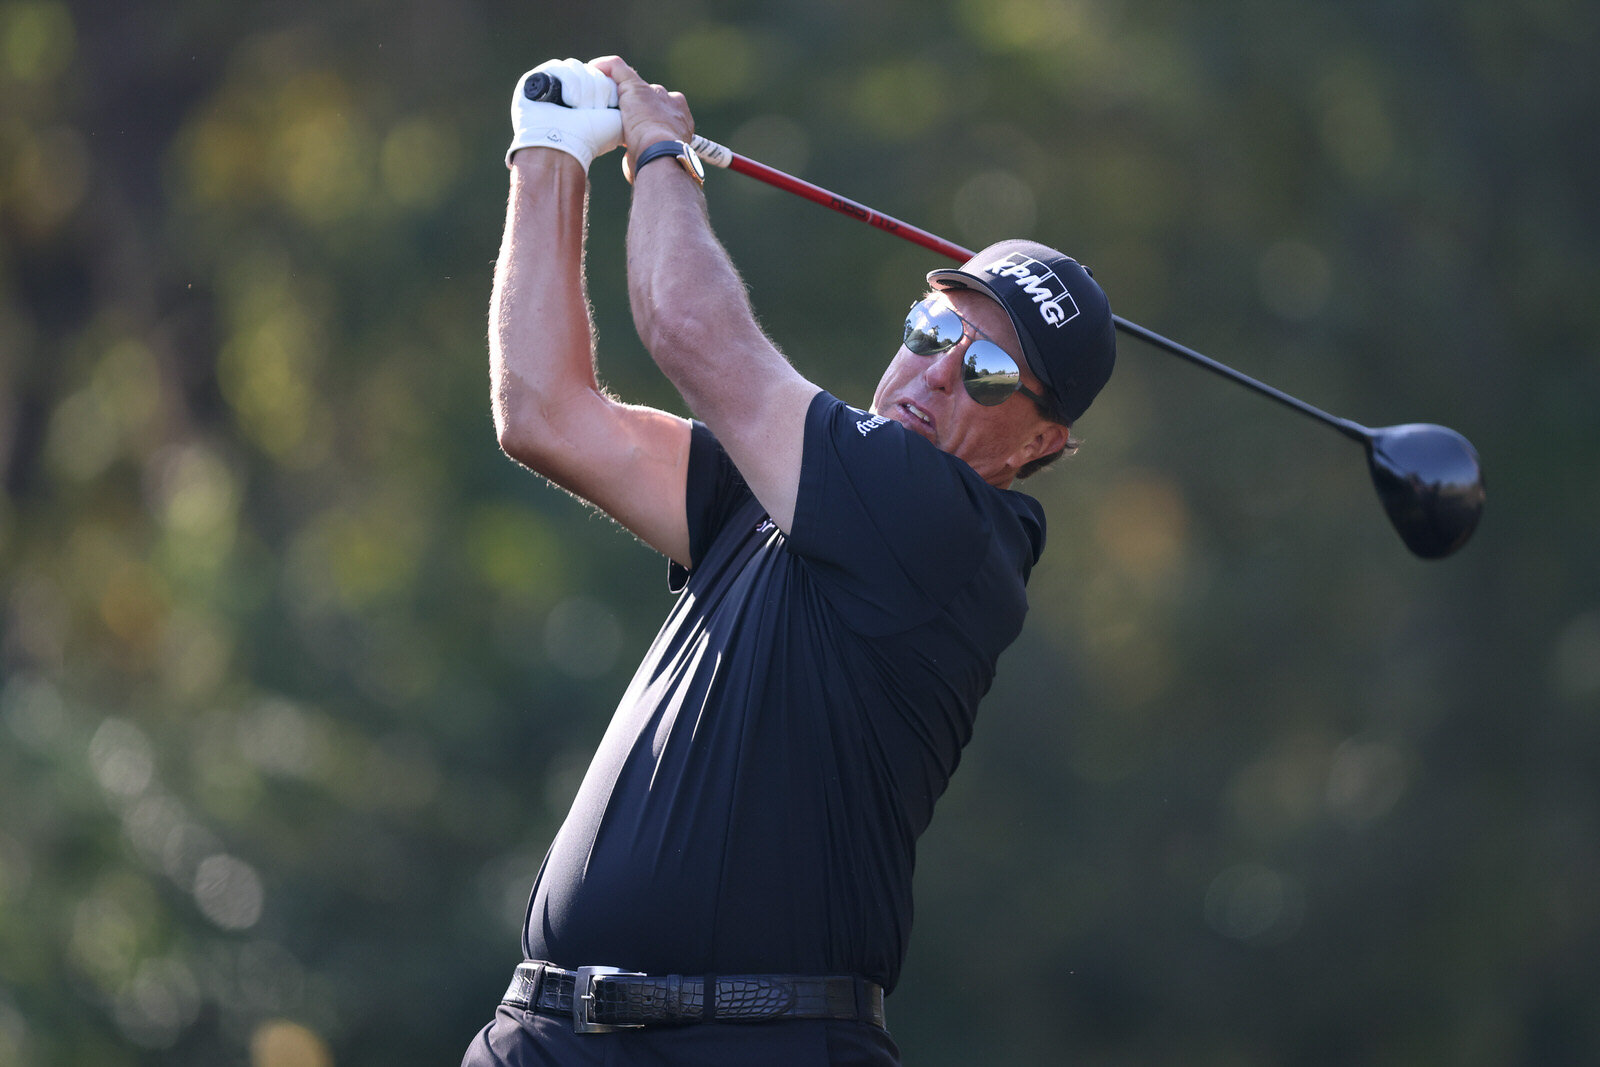  HOUSTON, TEXAS - NOVEMBER 06: Phil Mickelson of the United States plays his shot from the eighth tee during the second round of the Houston Open at Memorial Park Golf Course on November 06, 2020 in Houston, Texas. (Photo by Carmen Mandato/Getty Imag